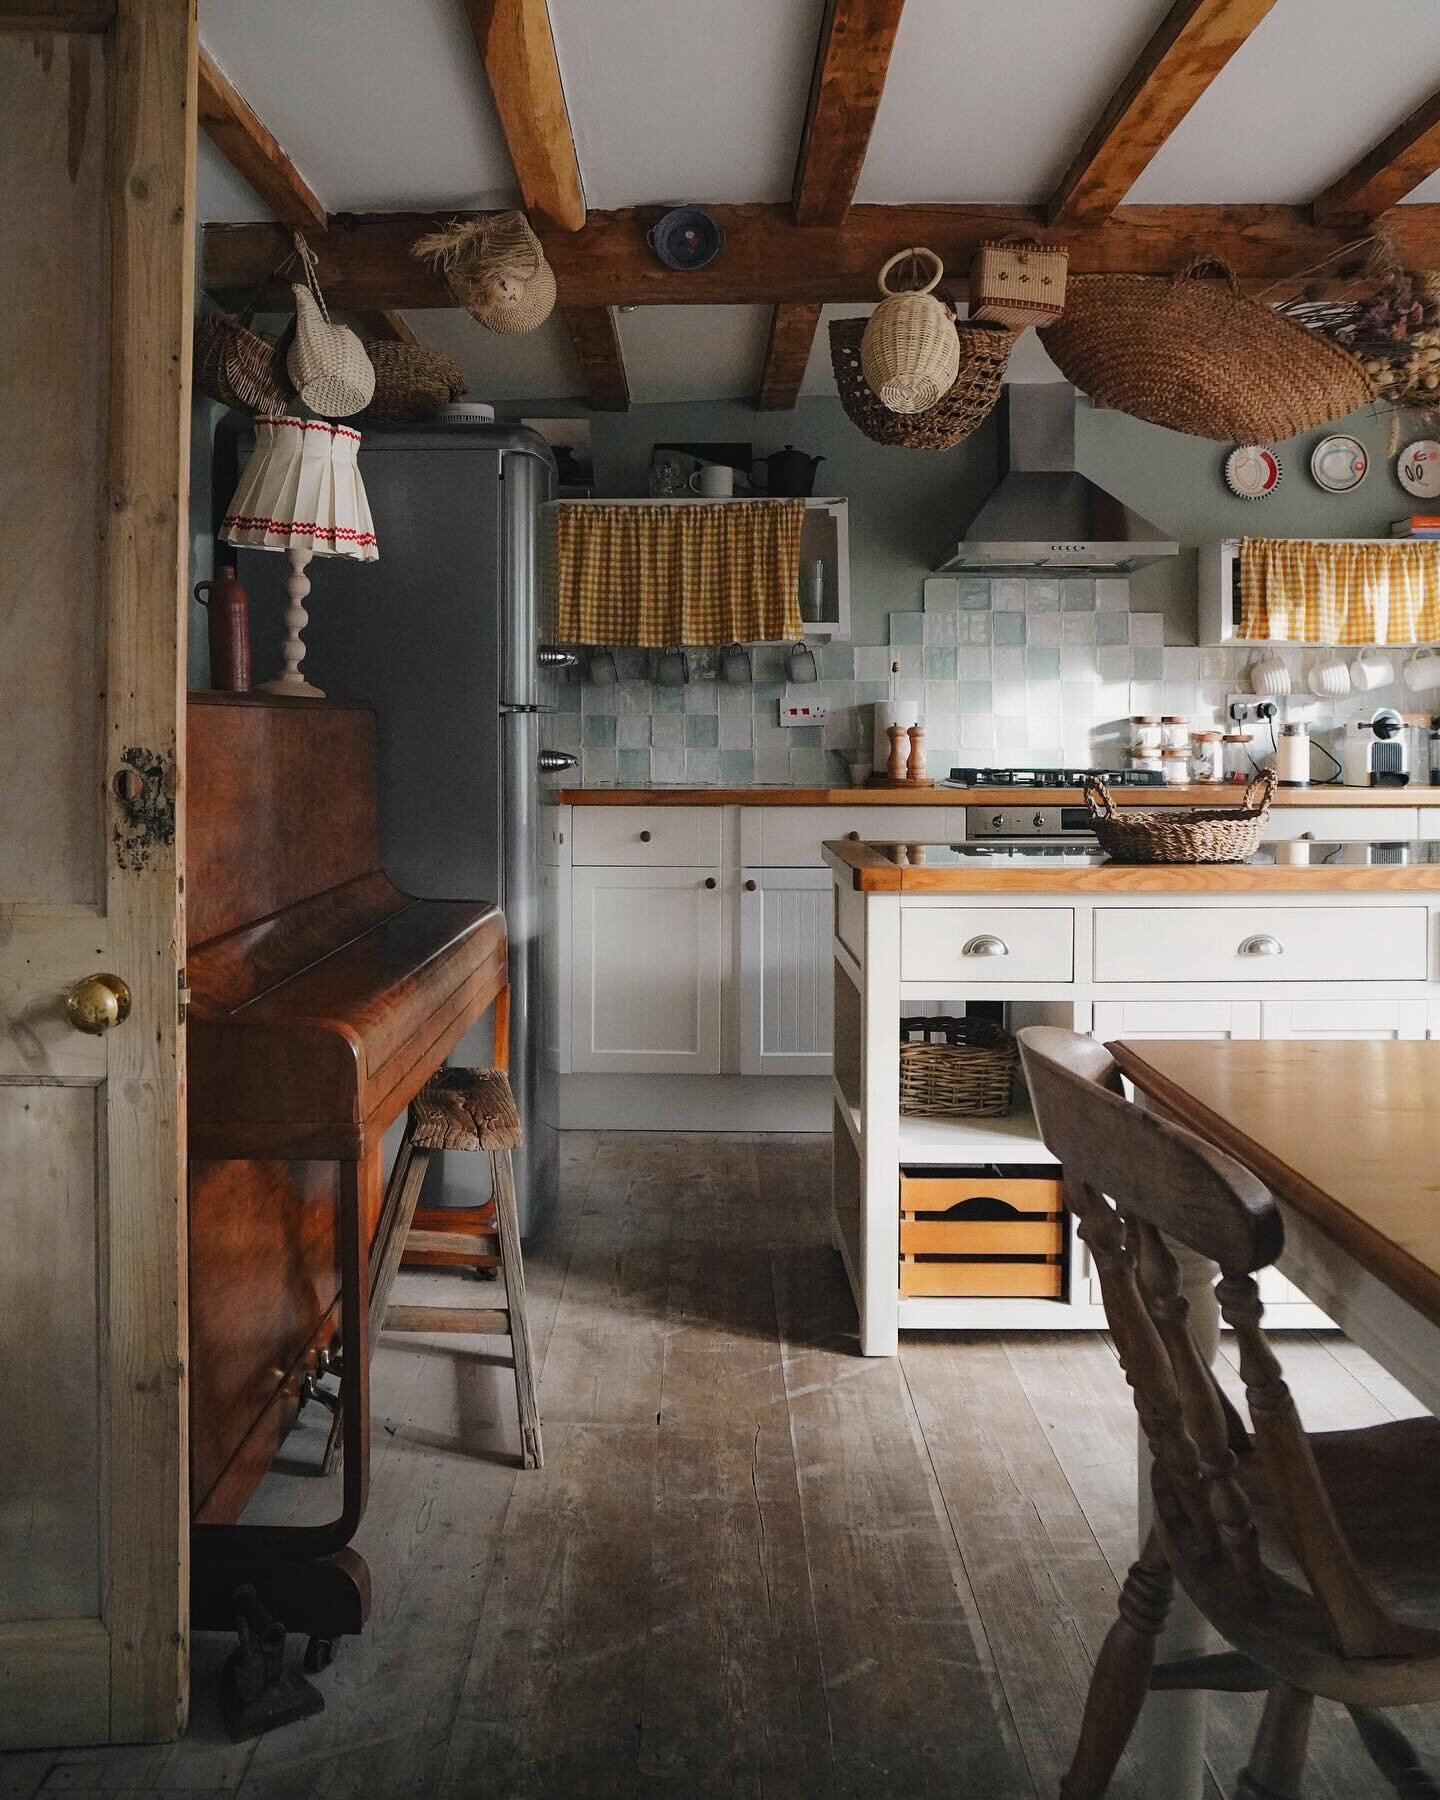 A post dedicated purely to the lovliness of this country kitchen @springcottagecotswolds 🧺 🌼 (ad/ invited stay)

#cotswolds #englishcountryside #airbnb #cottagecore